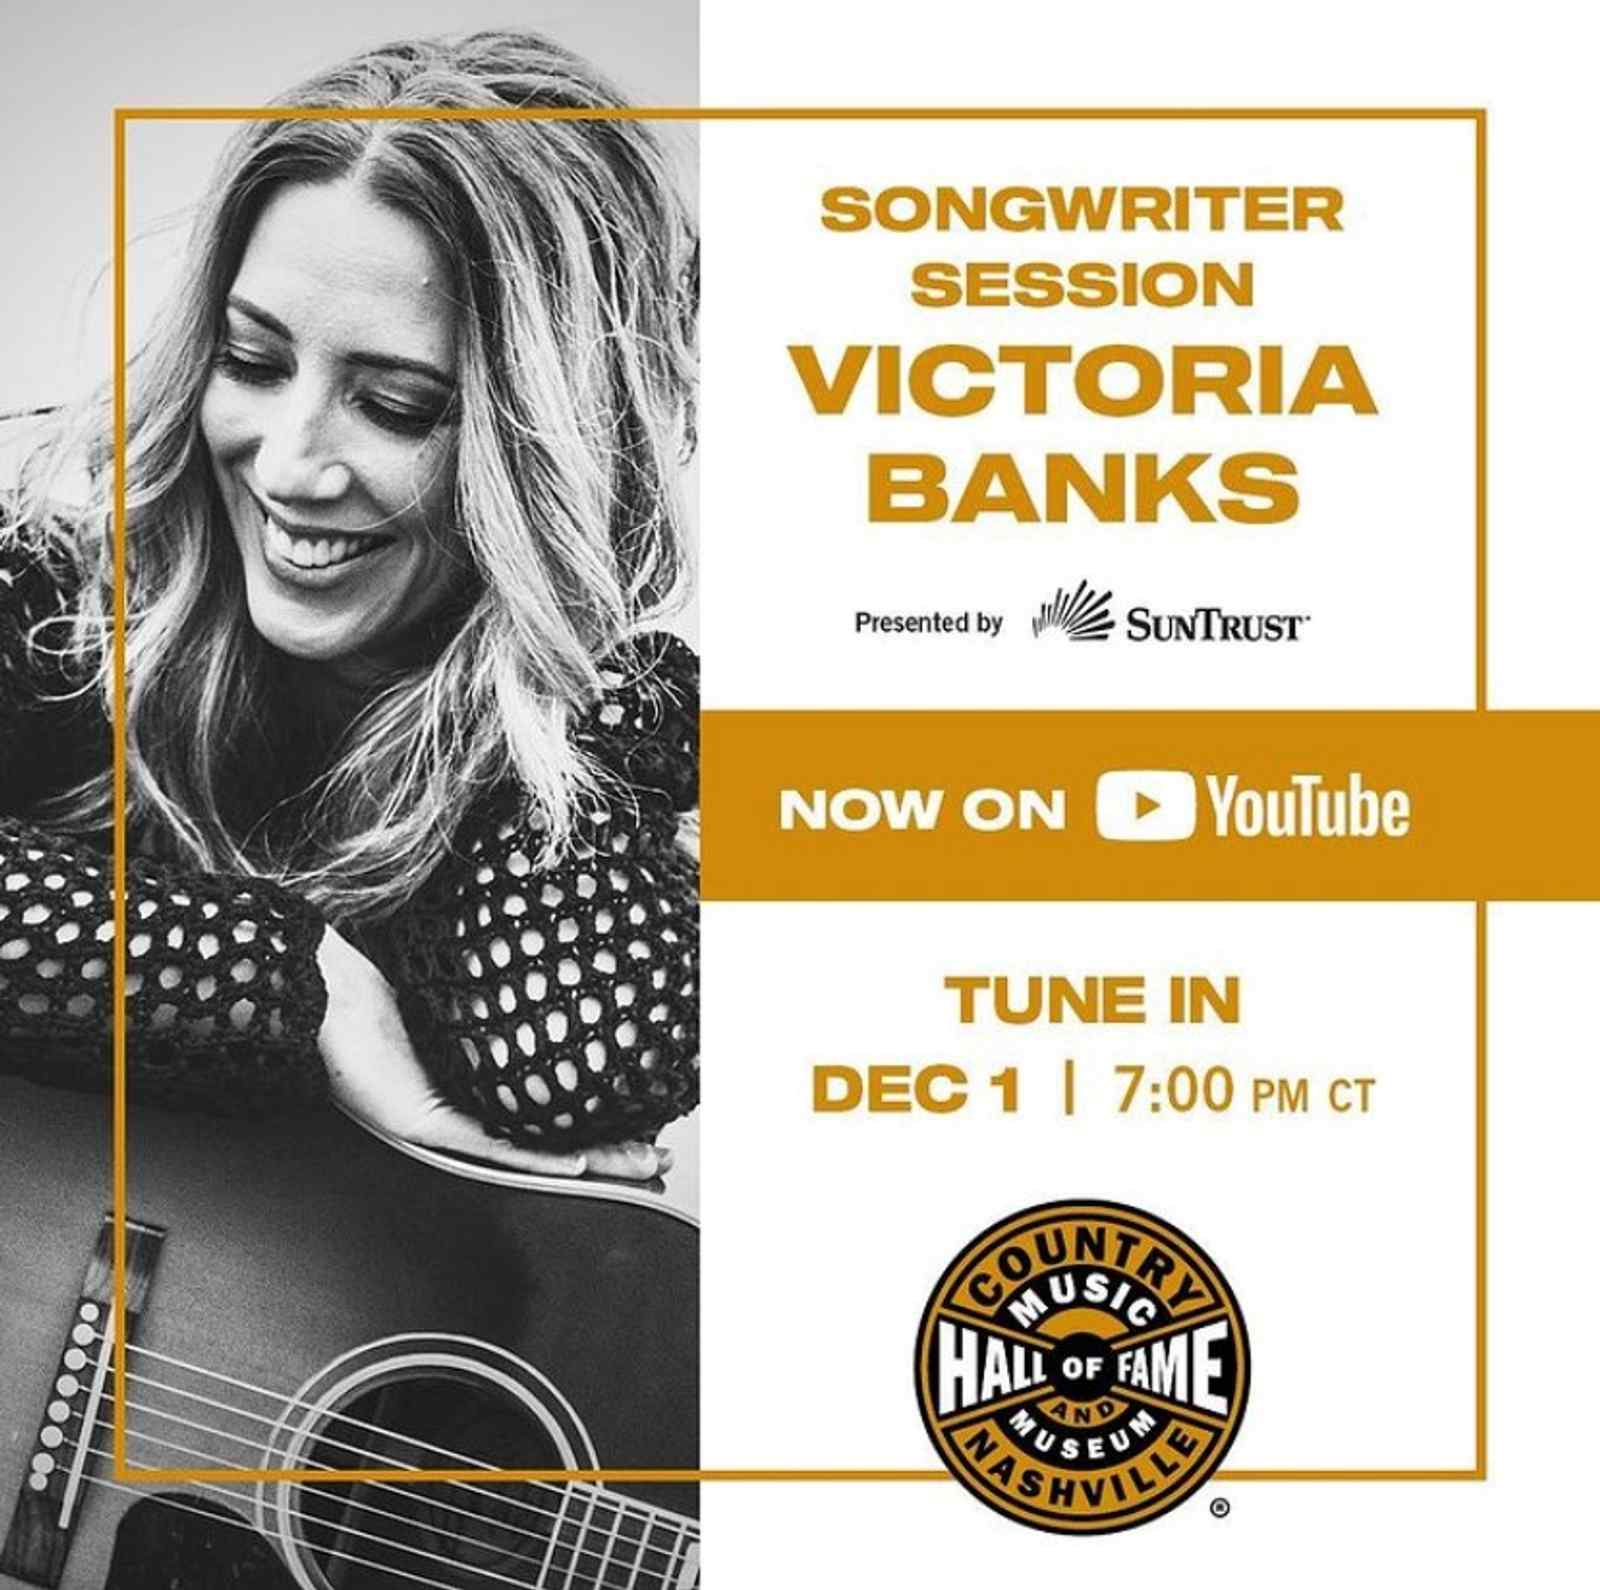 Songwriter Session: Victoria Banks